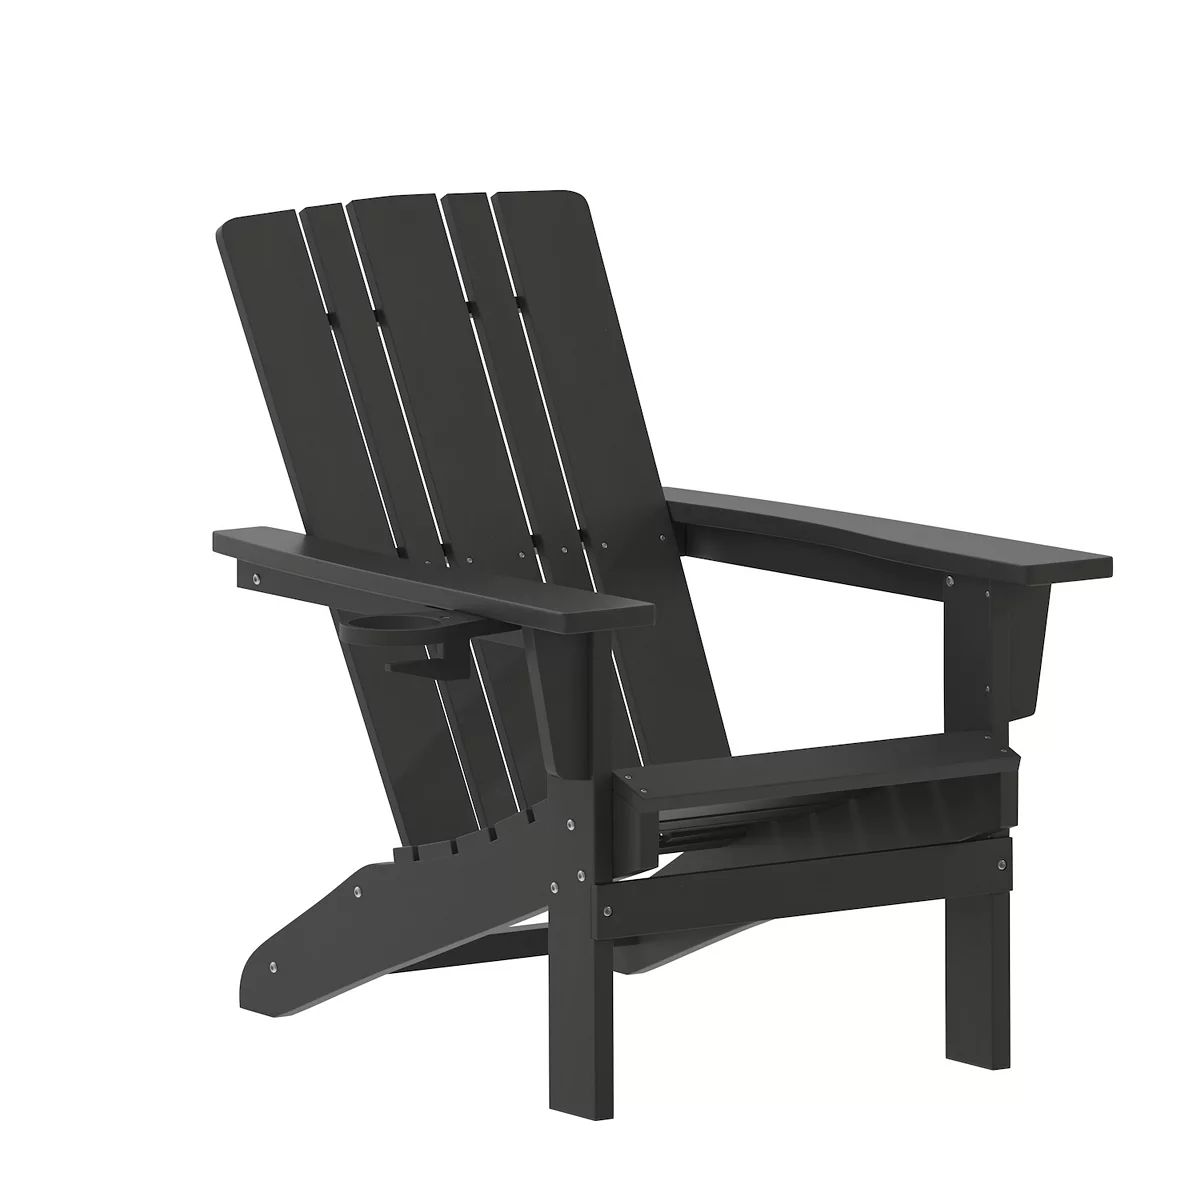 Flash Furniture Halifax Outdoor Adirondack Chair with Cup Holder | Kohl's